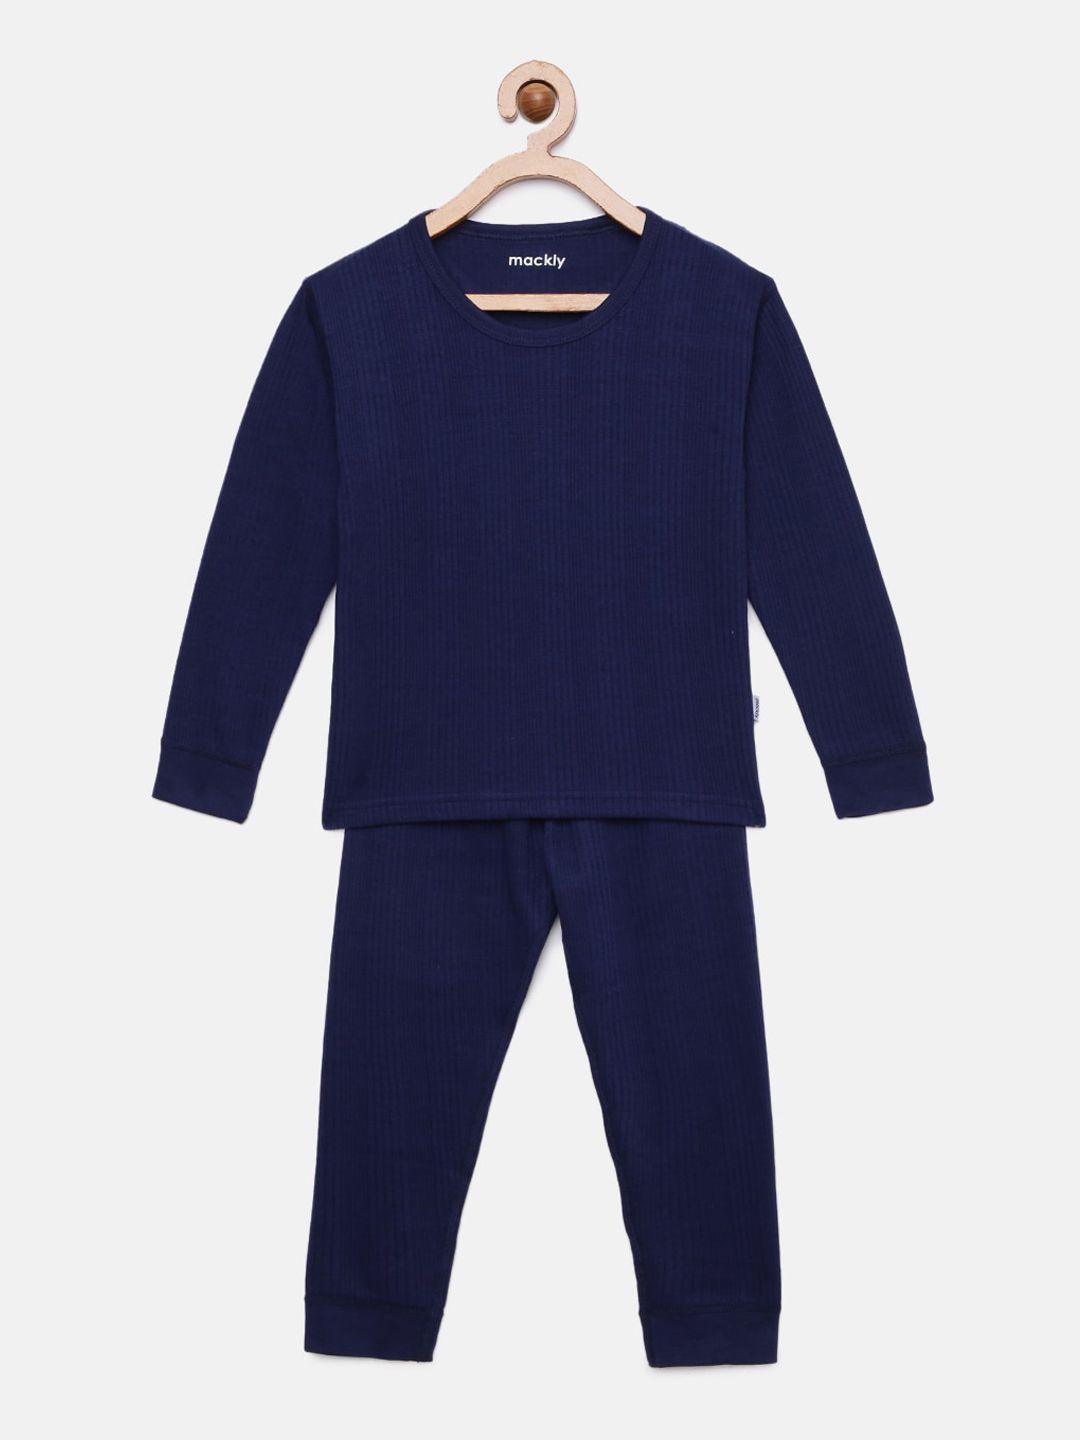 mackly kids navy blue striped thermal set